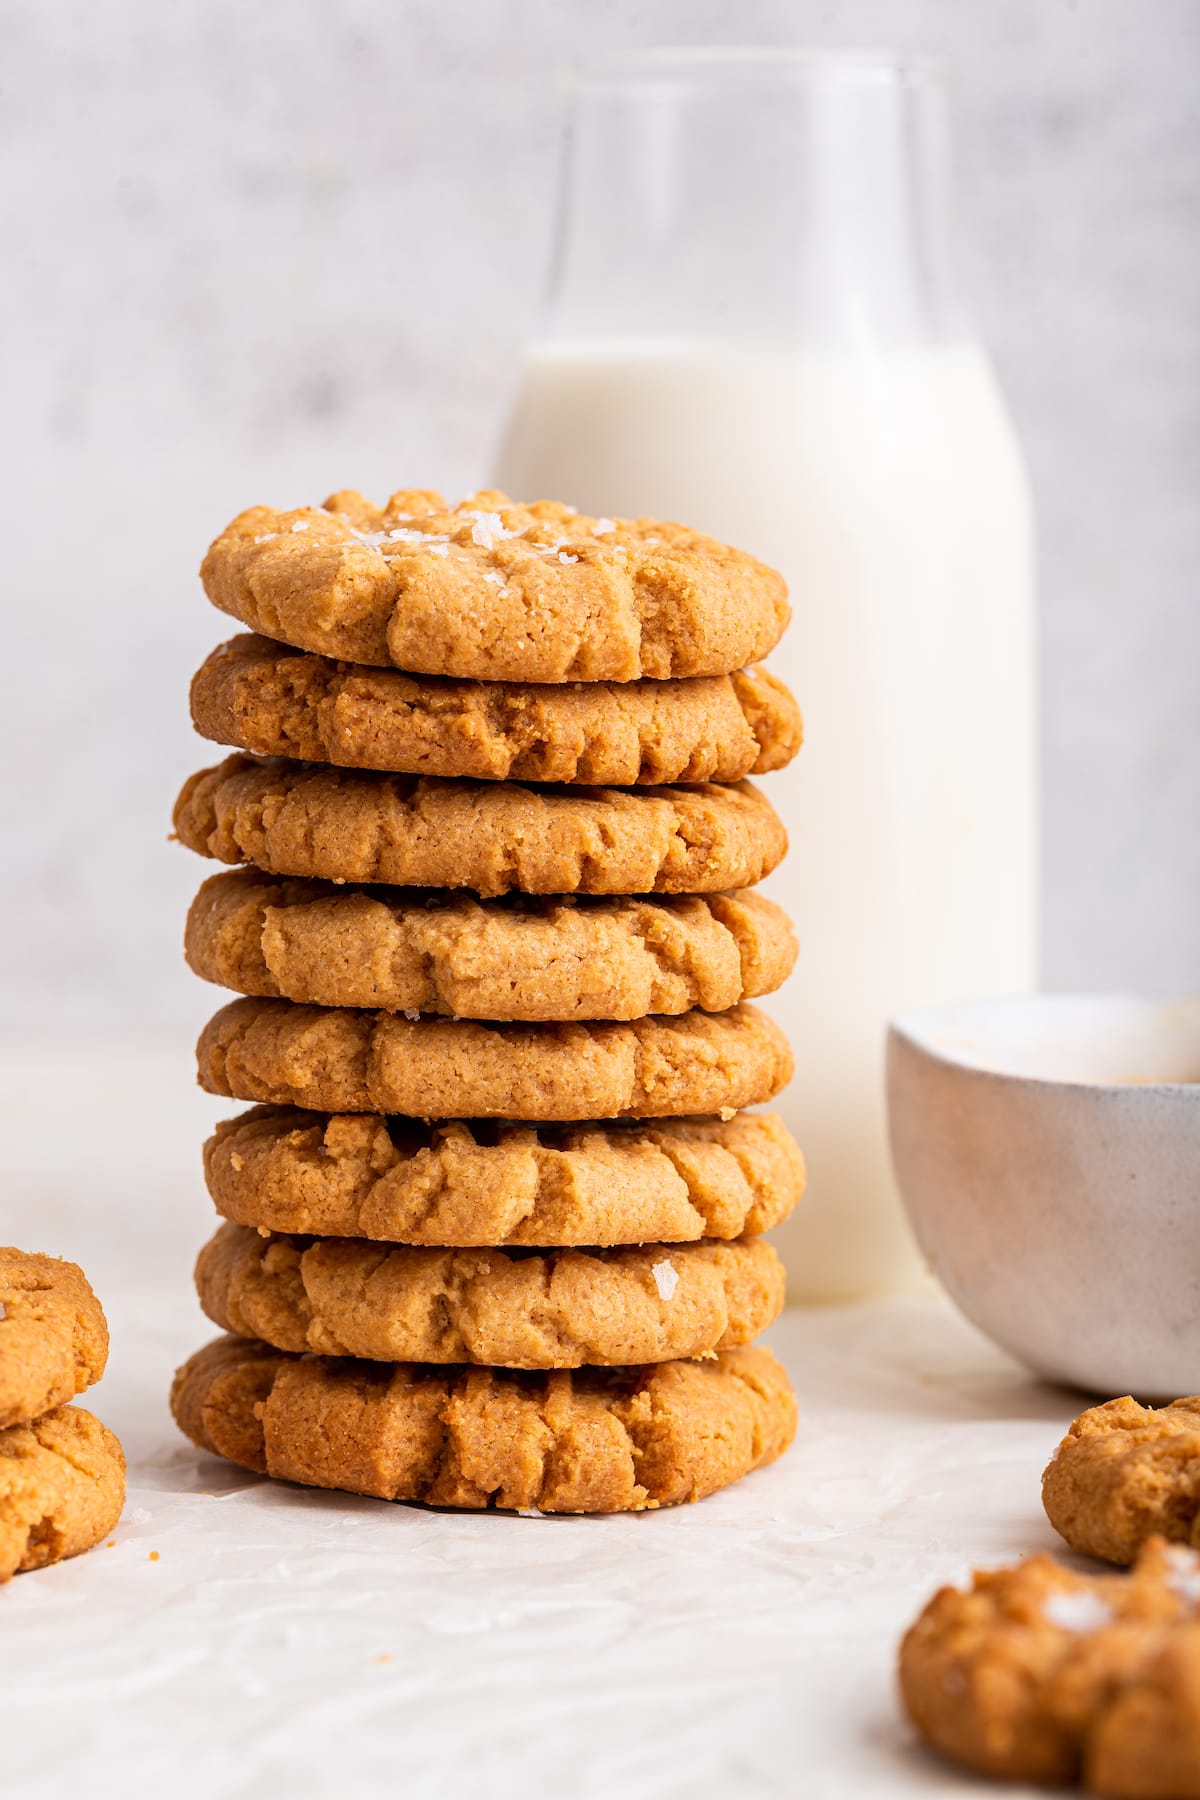 Stacked peanut butter cookies.